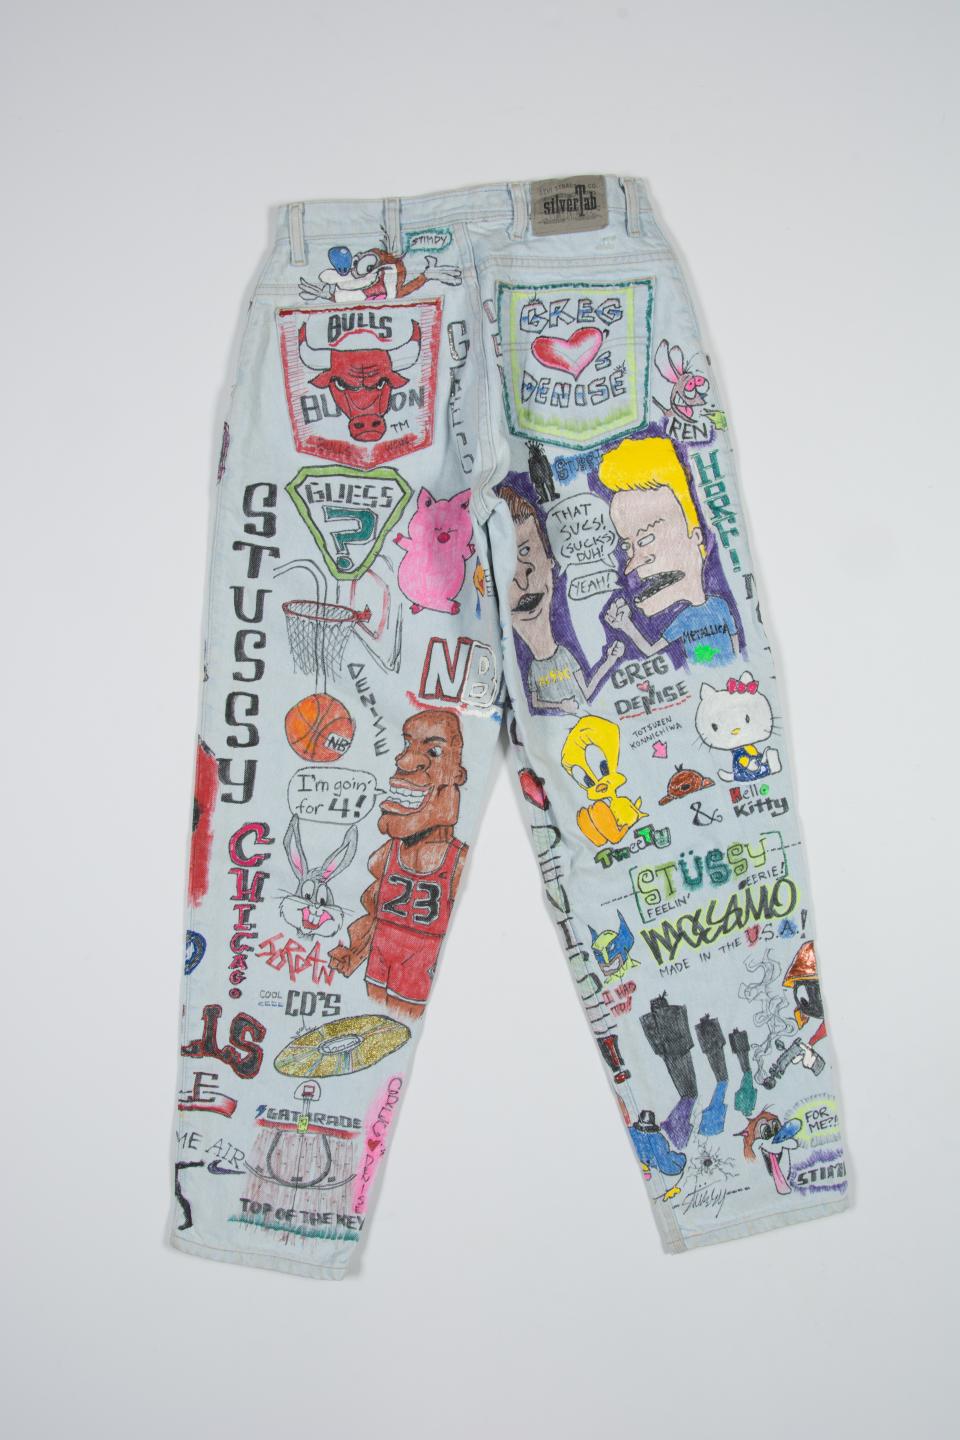 Slver tab jeans with customer added modewrn iconography and cartoons including Chicago Bulls Bevis and Butthead Hello Kitty Tweety Stussy NBA Daffy Duck Taz Jurassic Park created by Ben Ramirez